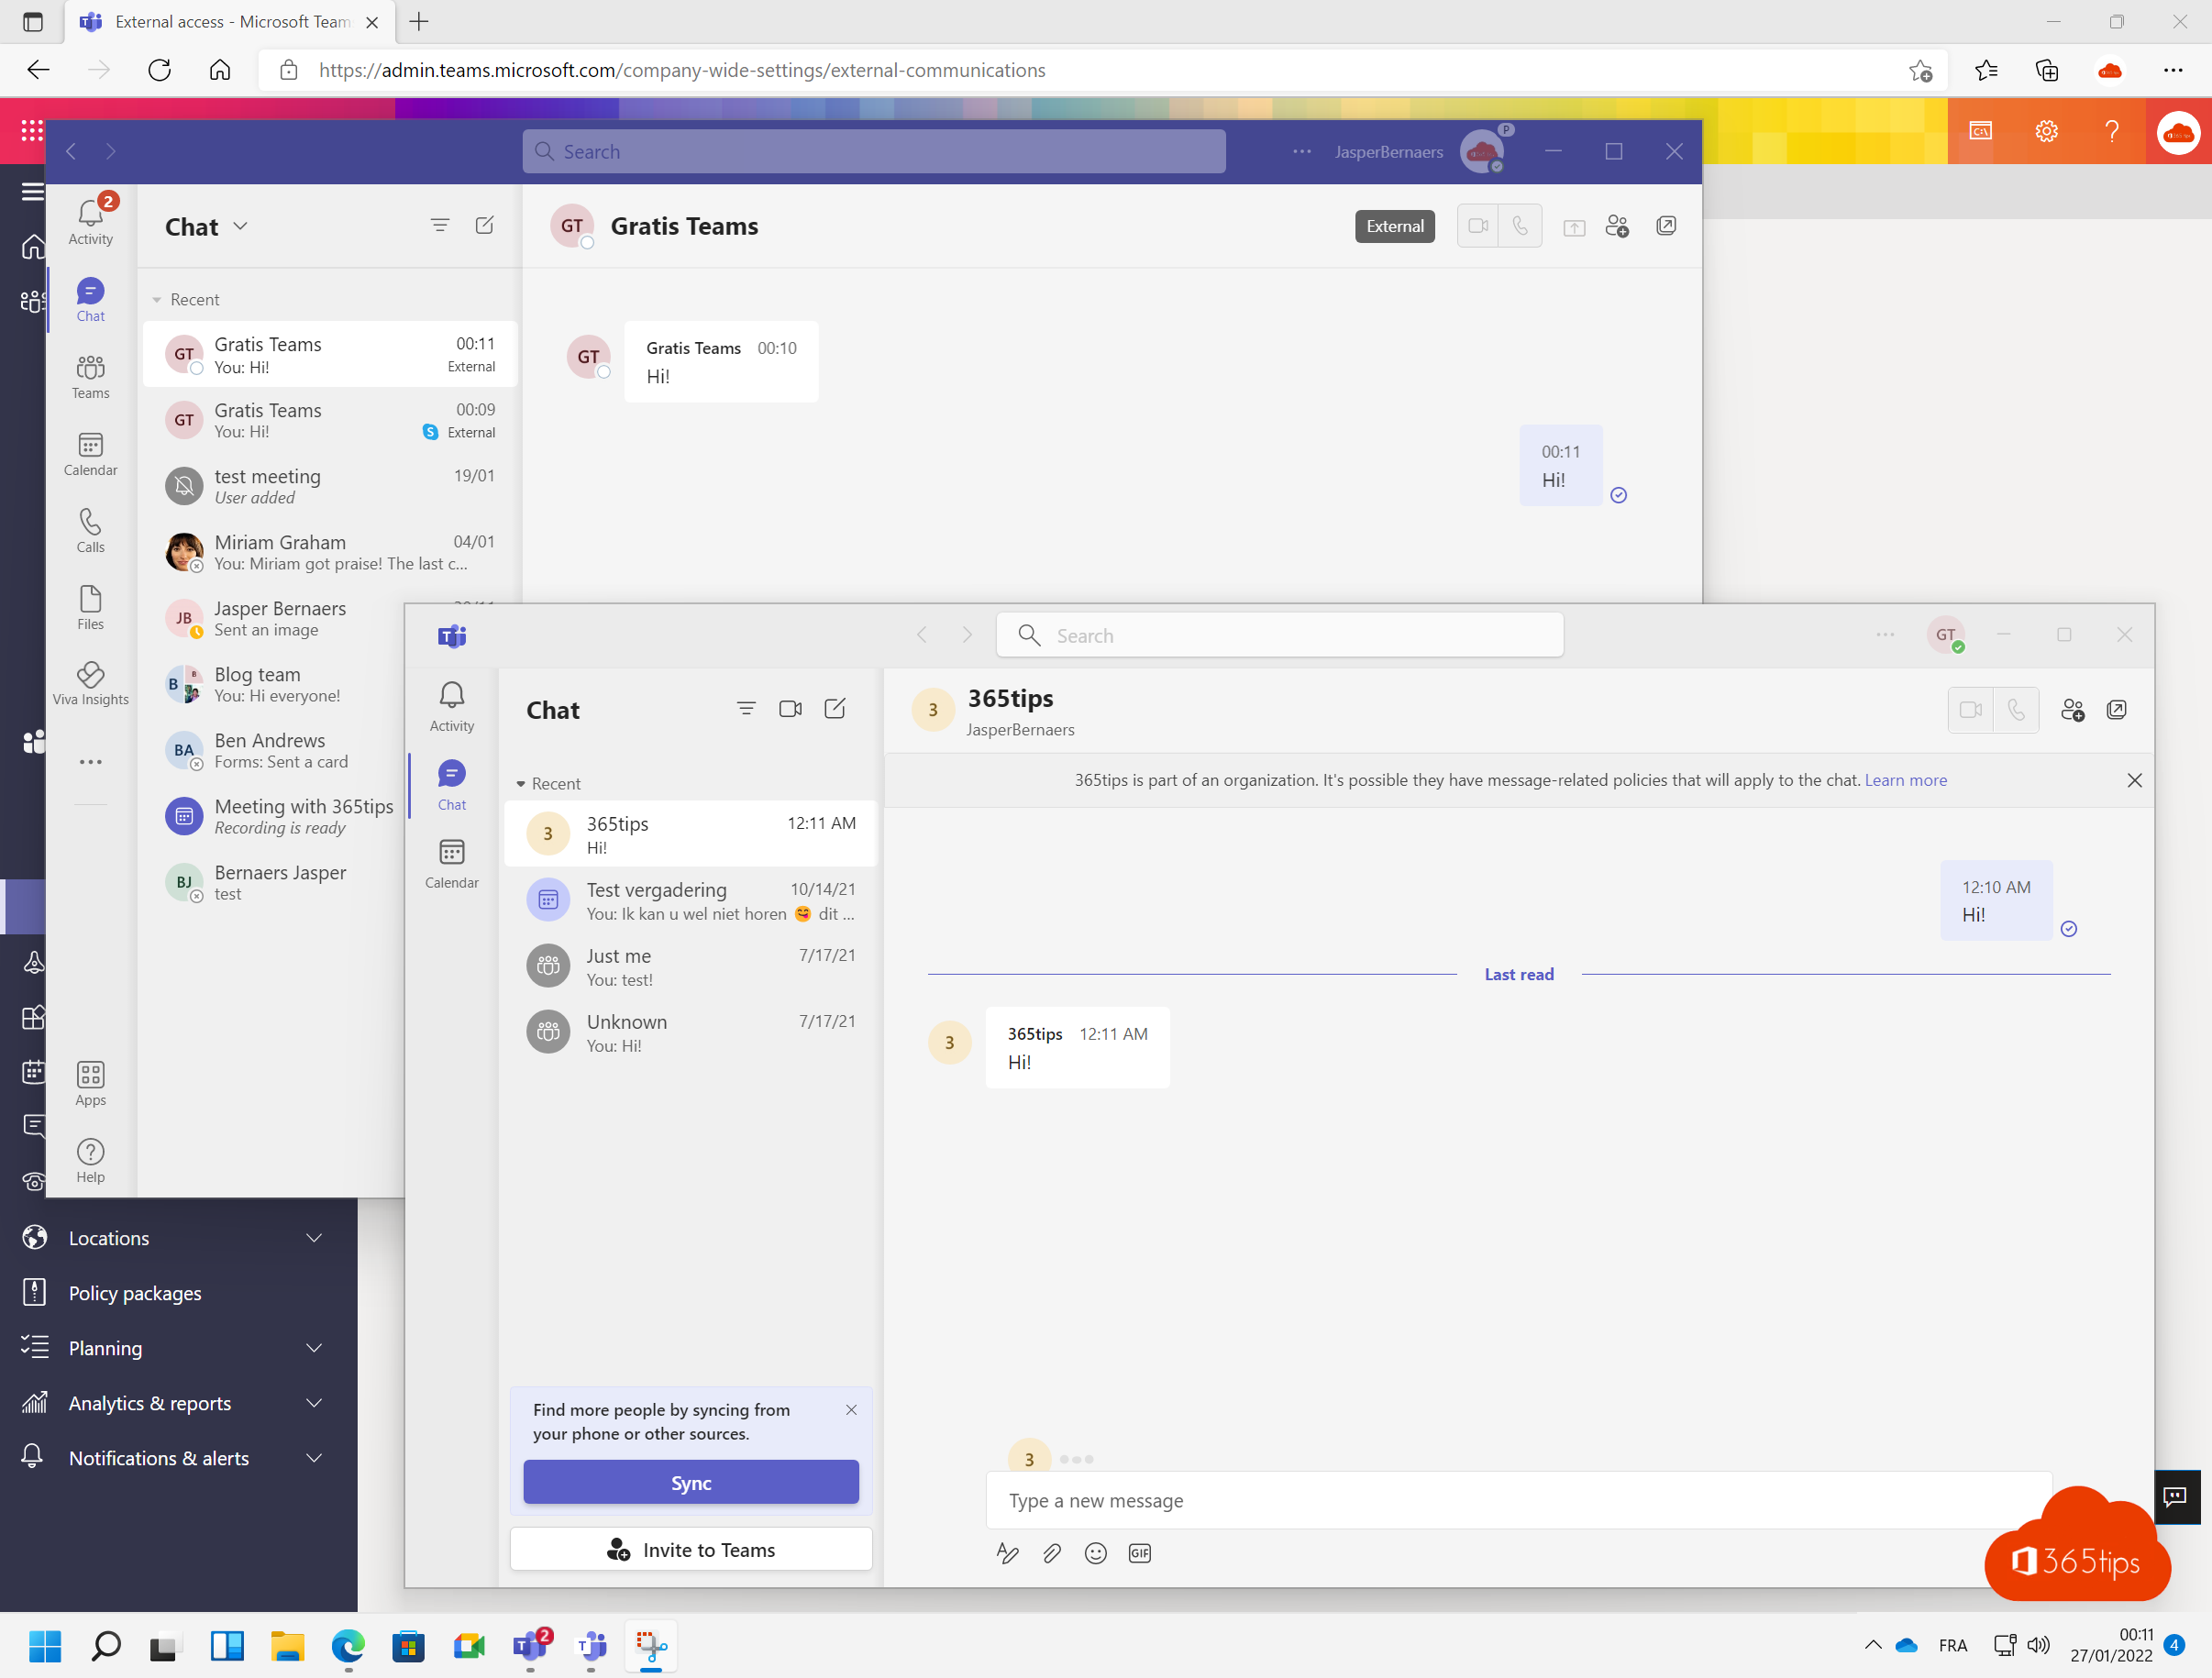 🧑‍🤝‍🧑 Microsoft Teams-users can now communicate with any Teams-user outside the organization